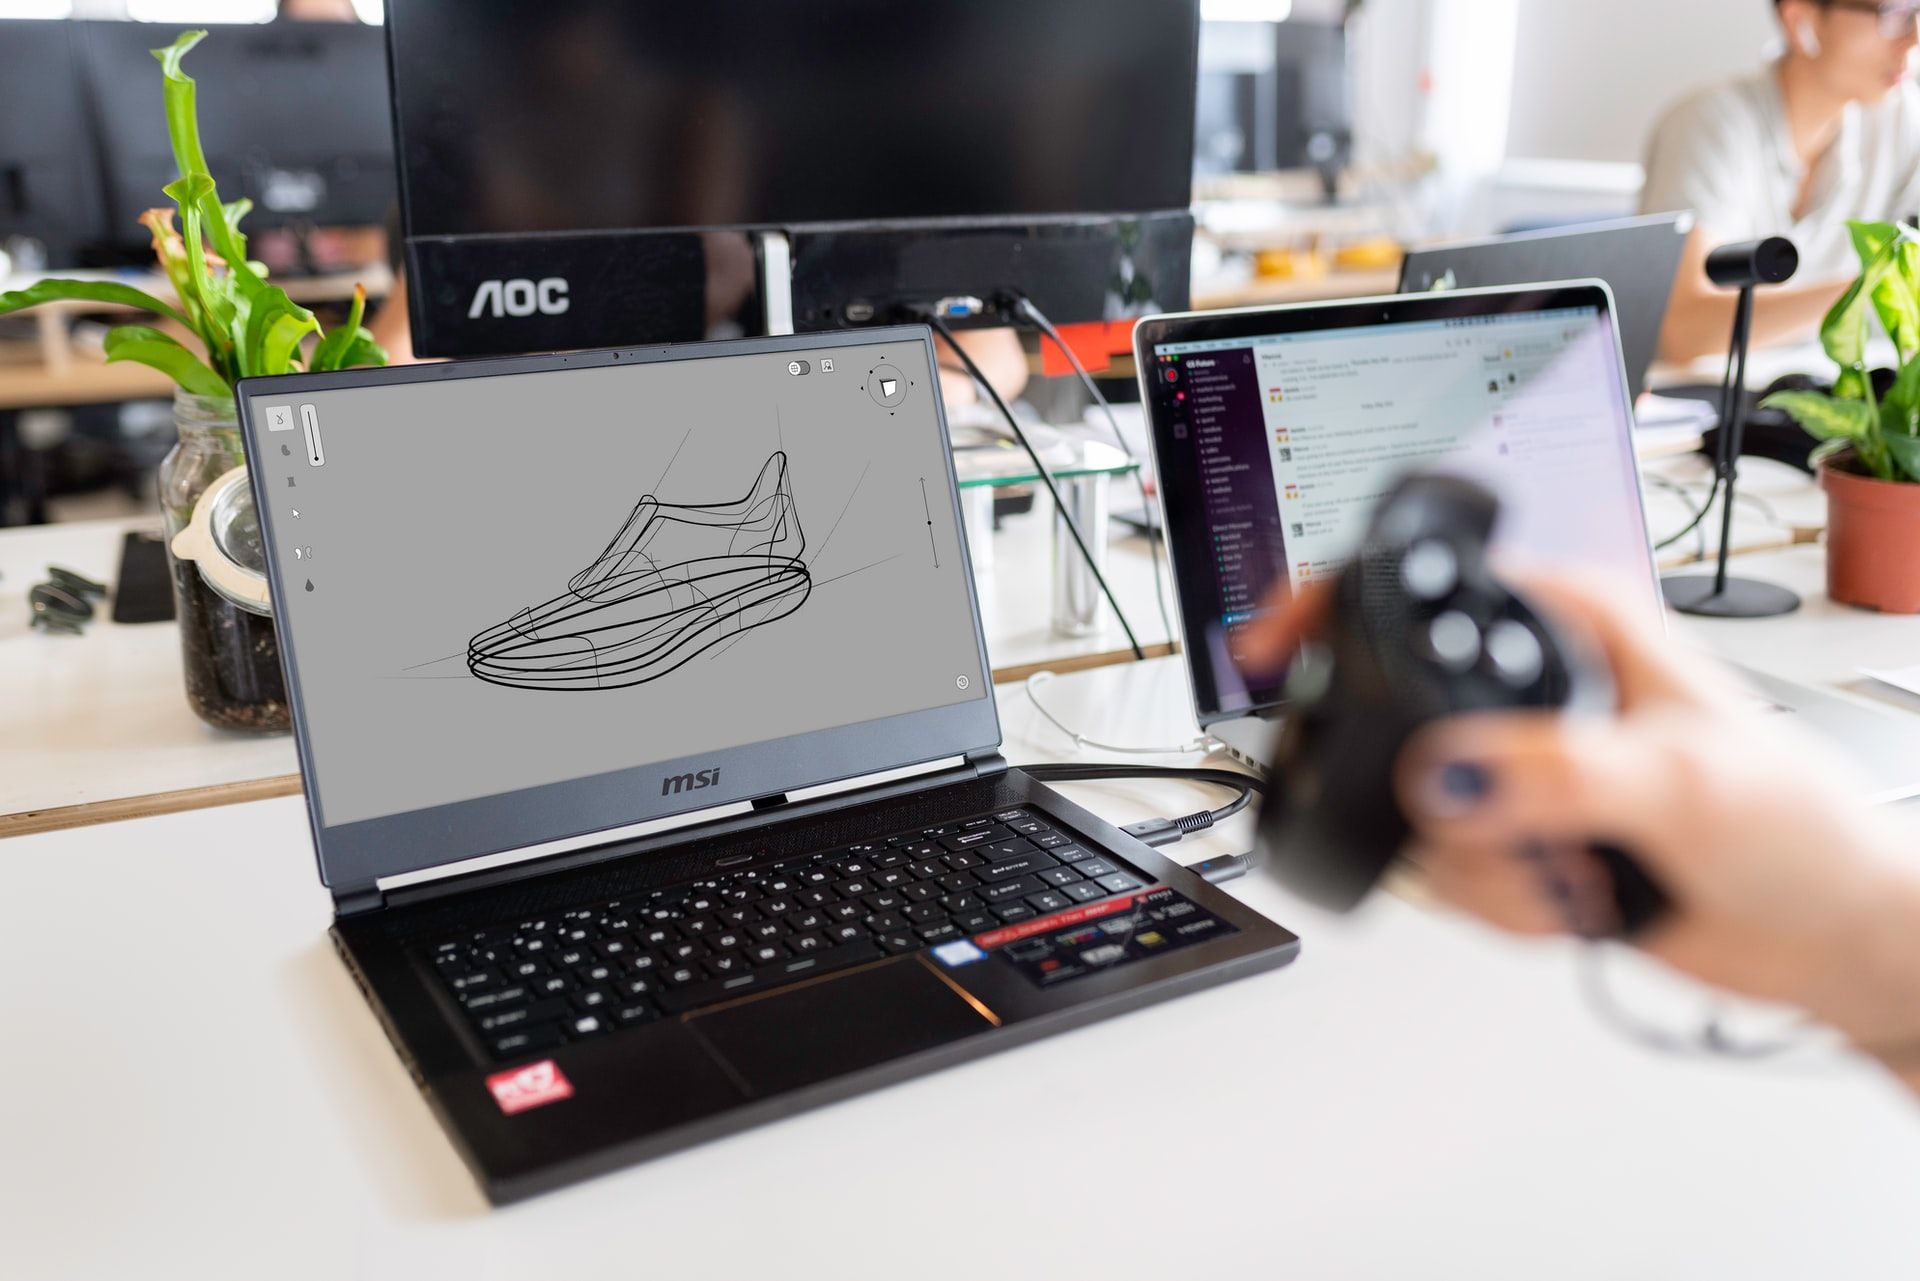 Designing Shoes With VR Technology